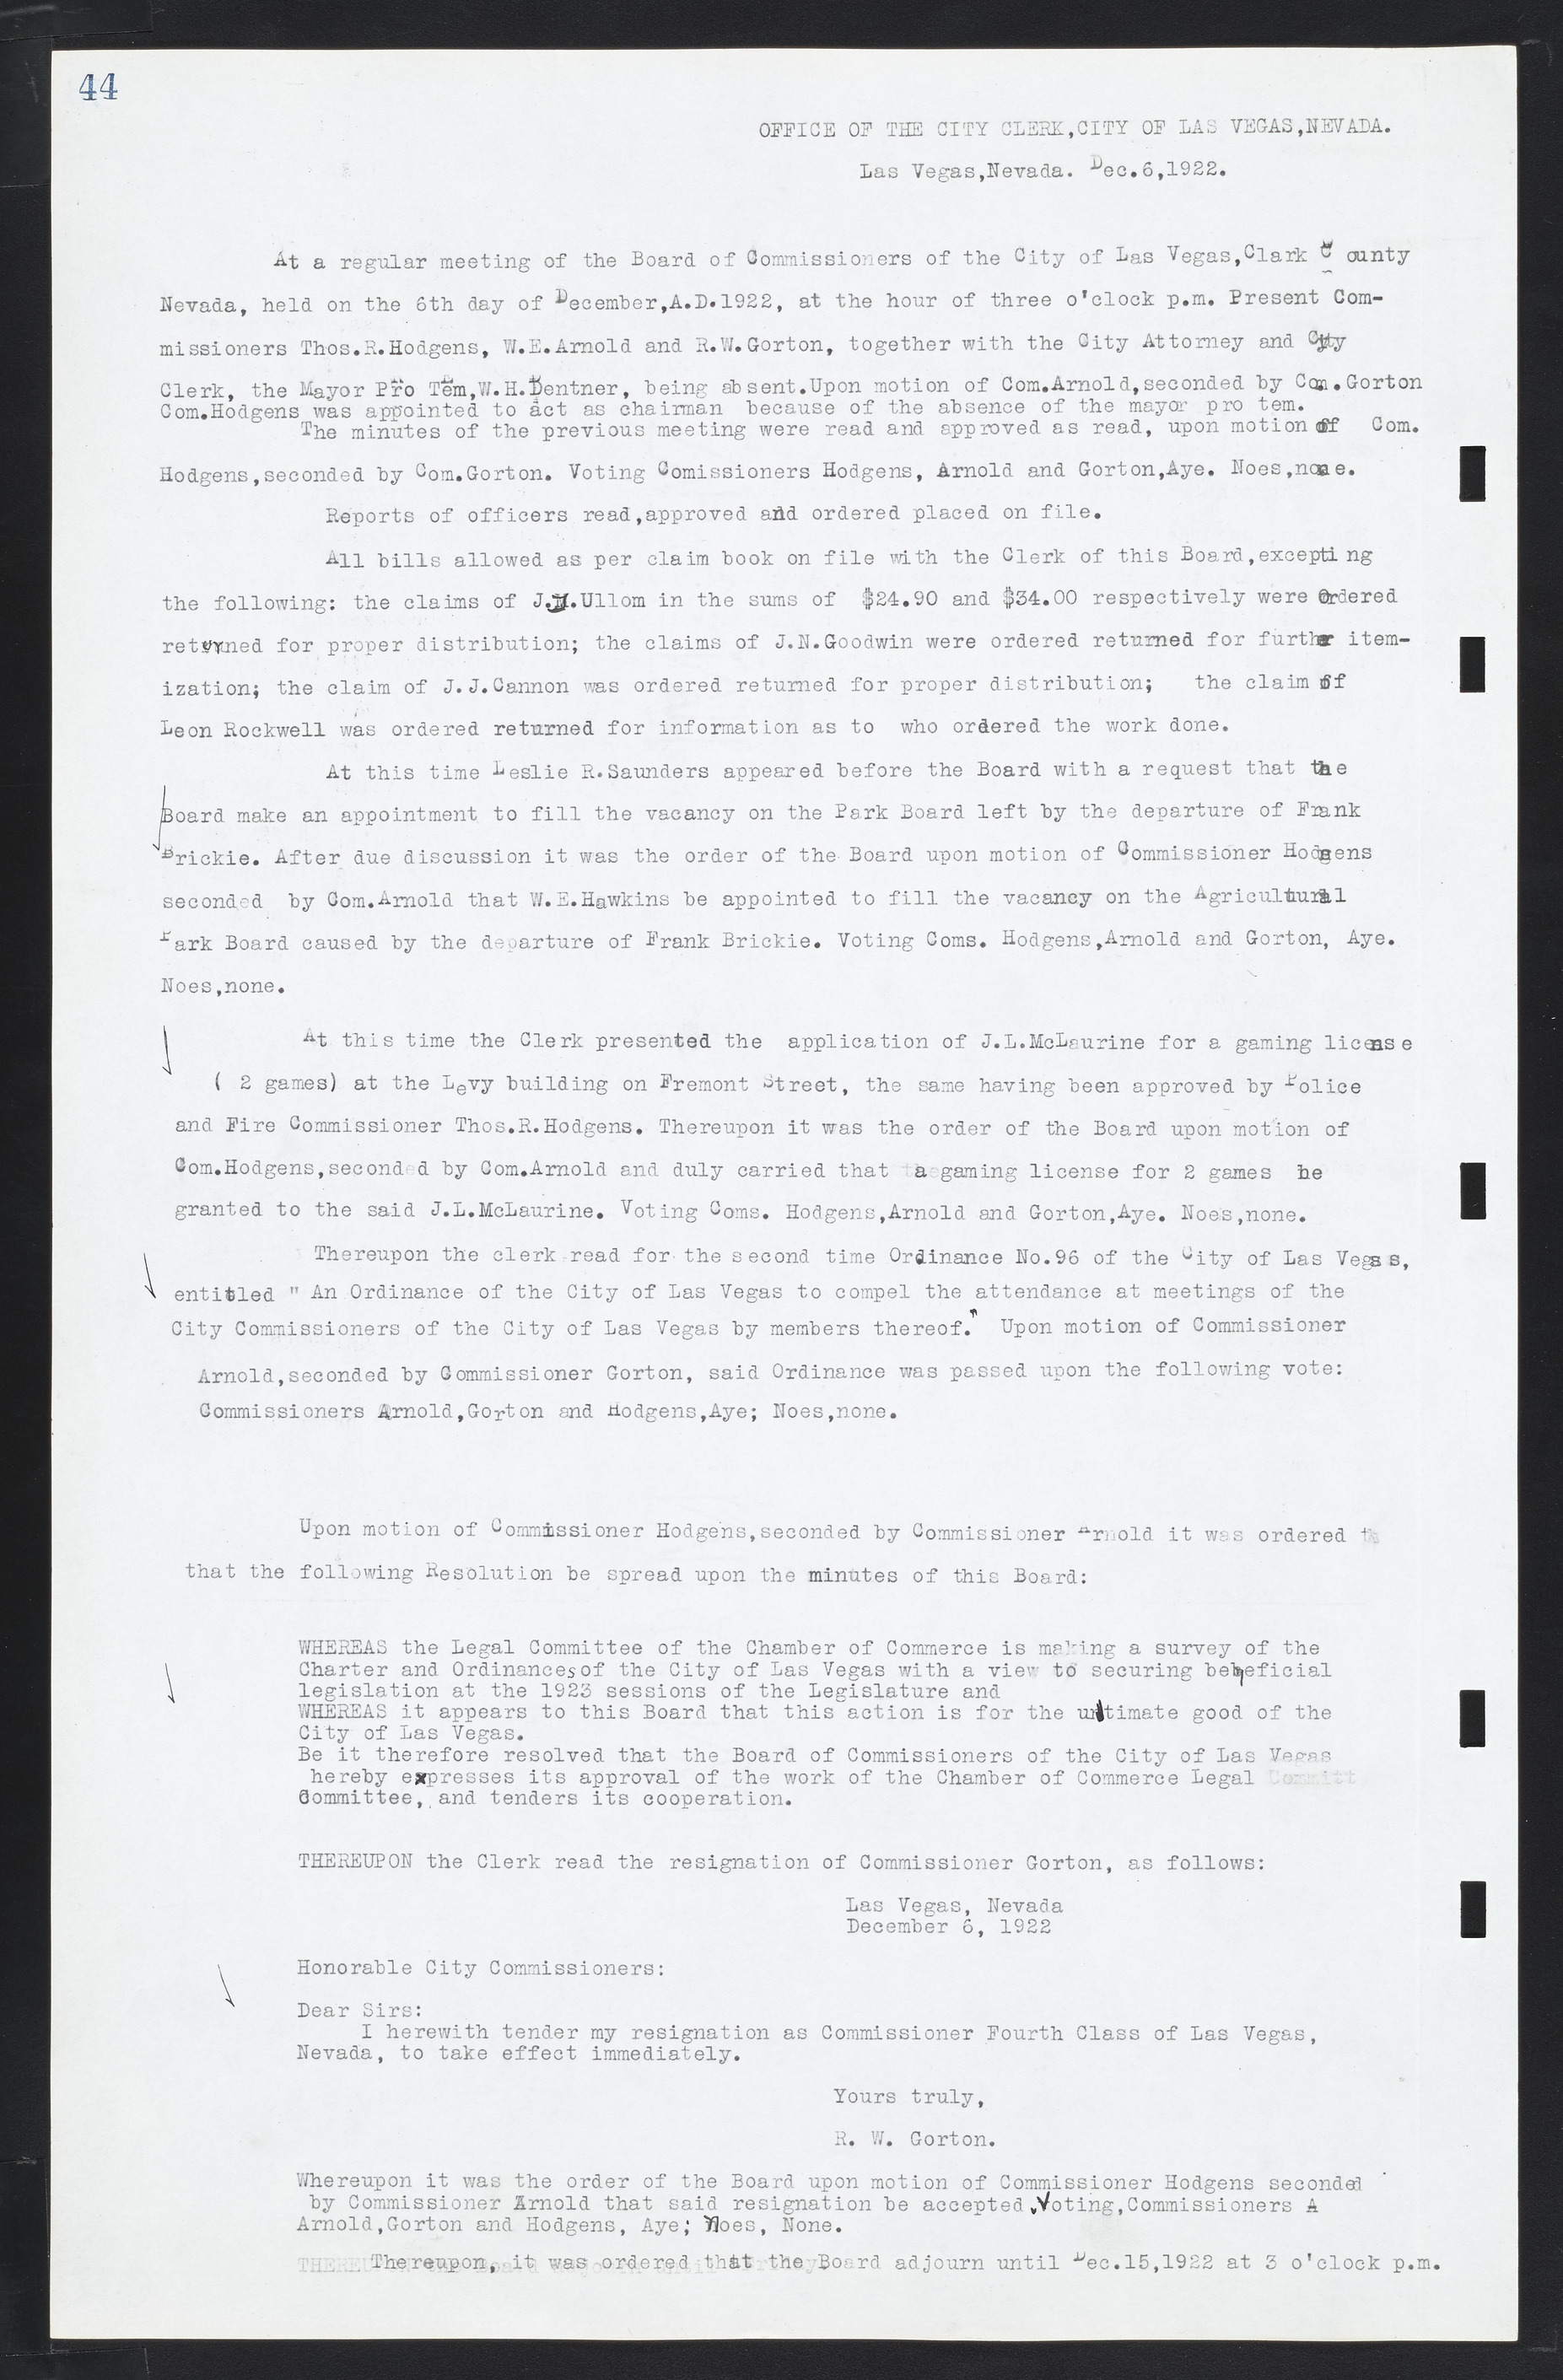 Las Vegas City Commission Minutes, March 1, 1922 to May 10, 1929, lvc000002-51